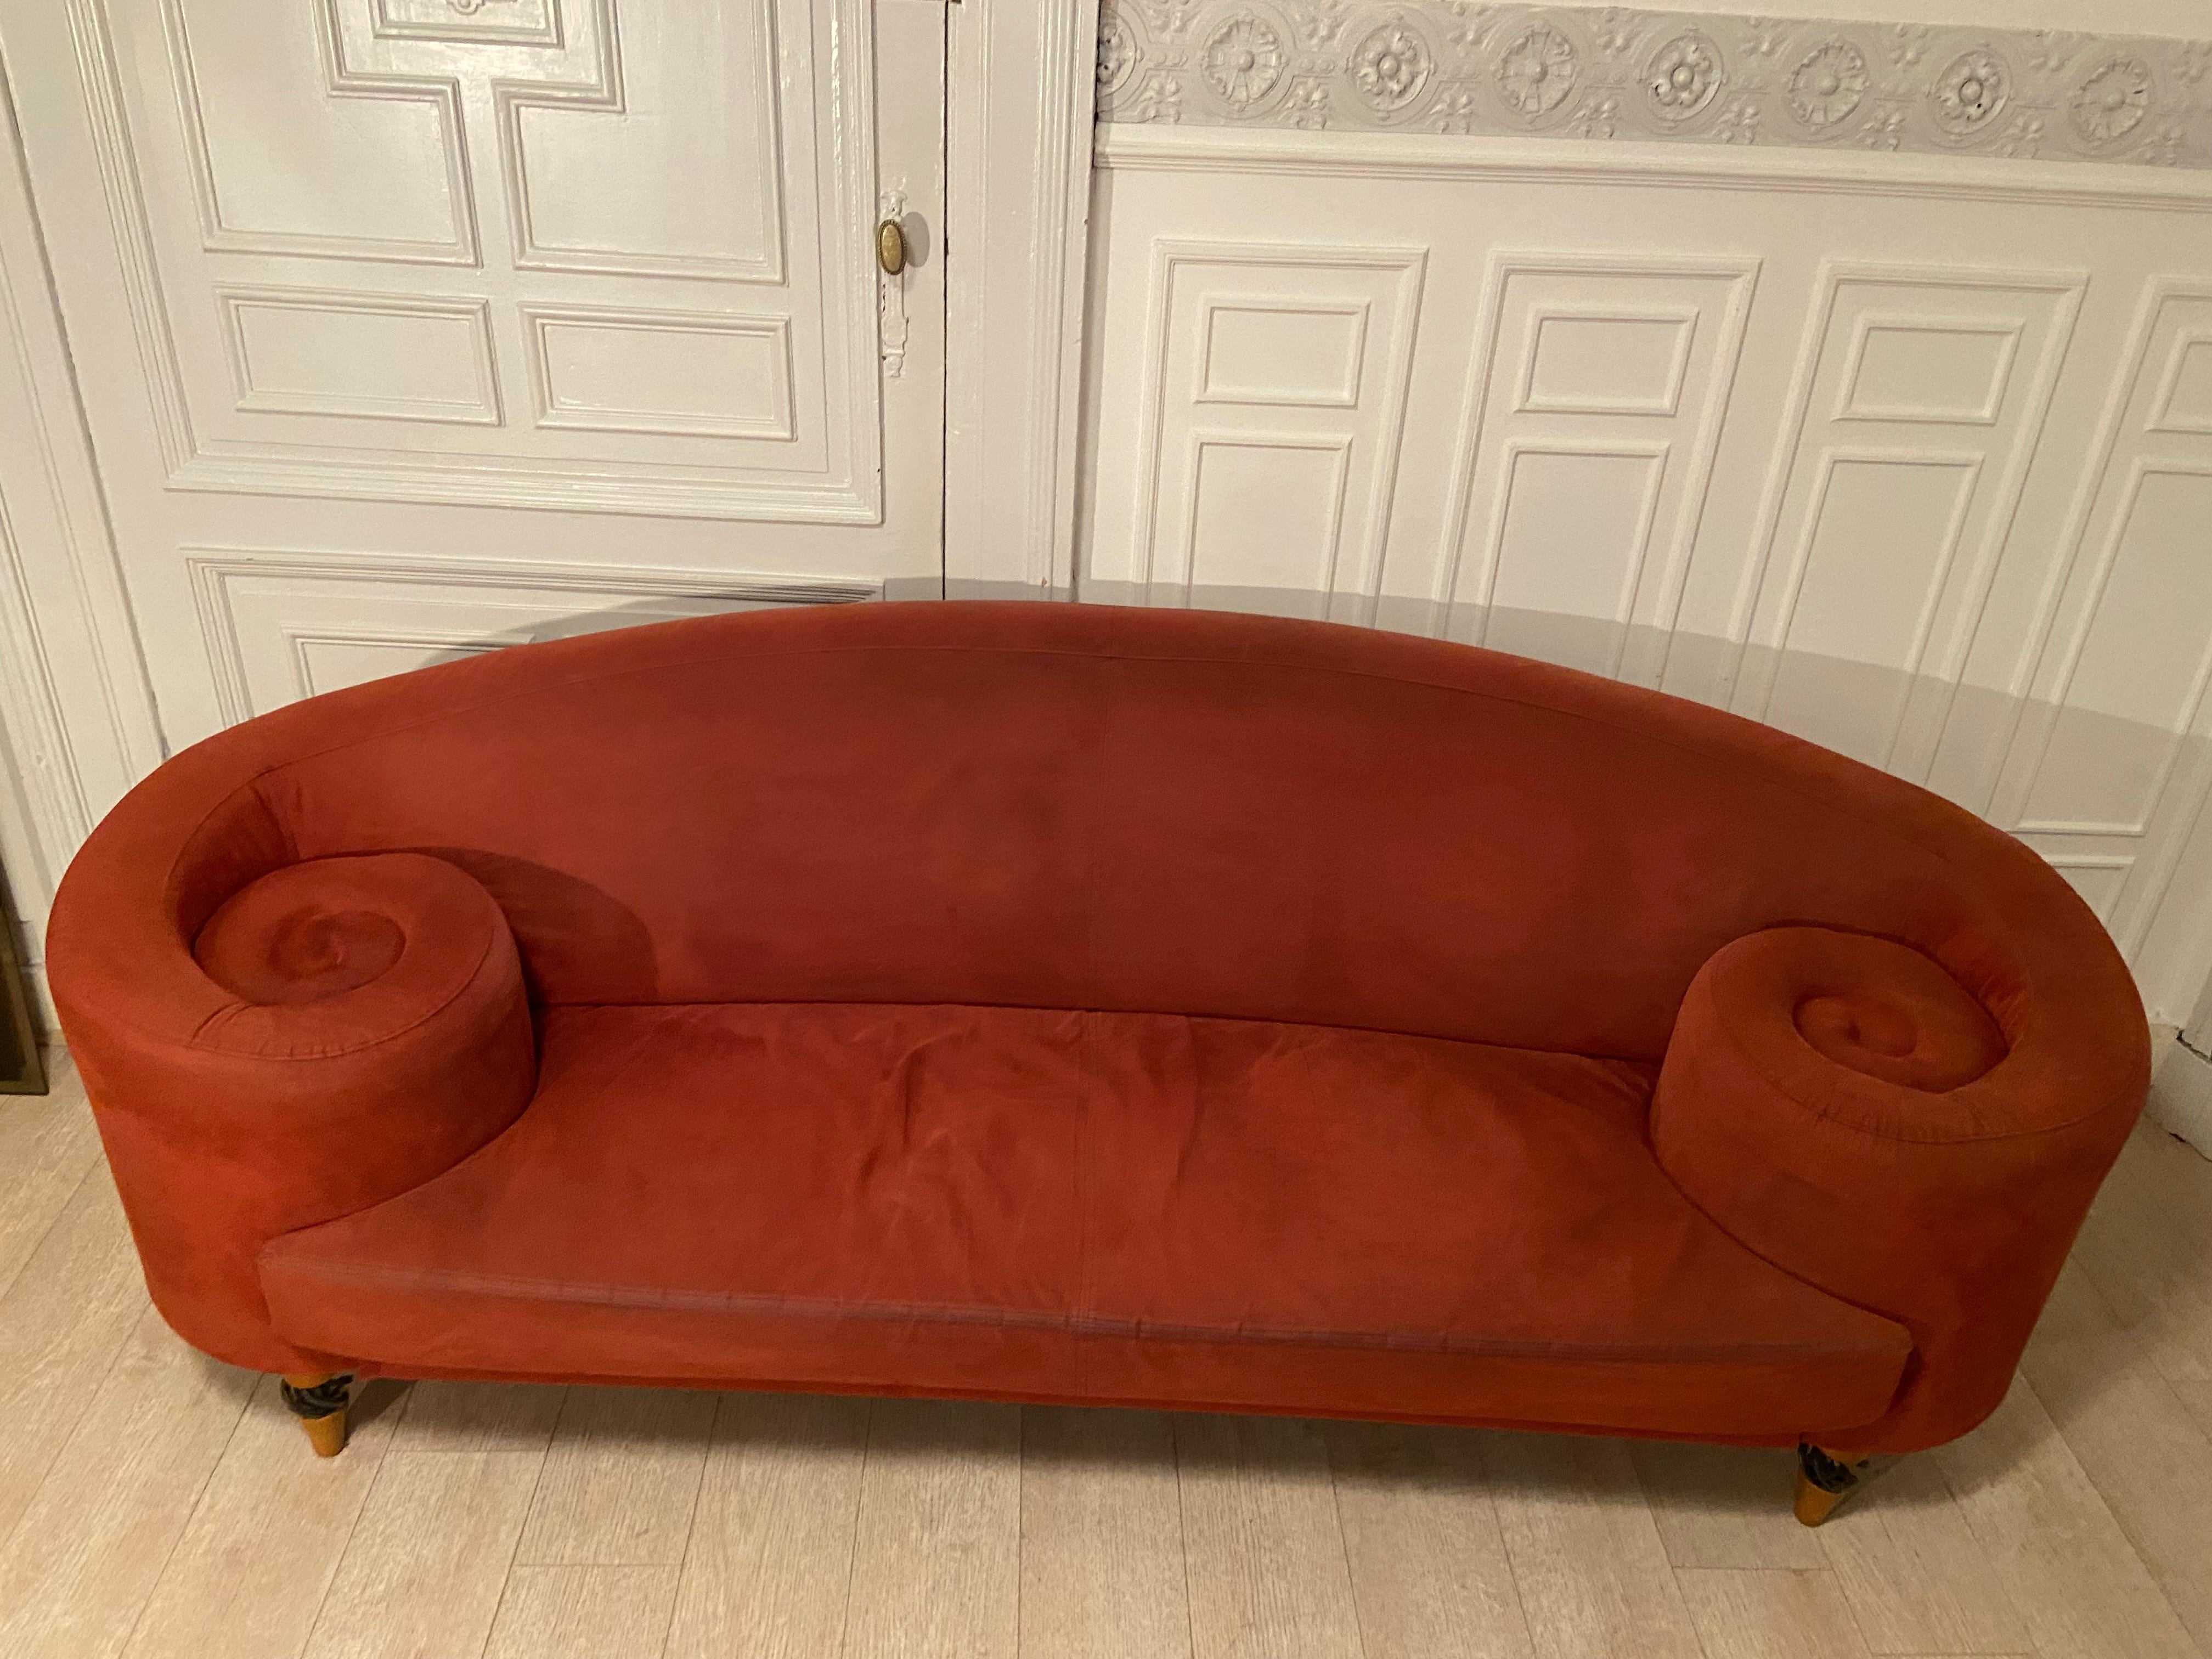 20th Century Sofa by Maroeska Metz for Gelderland Ax, Netherlands, a Pair Available